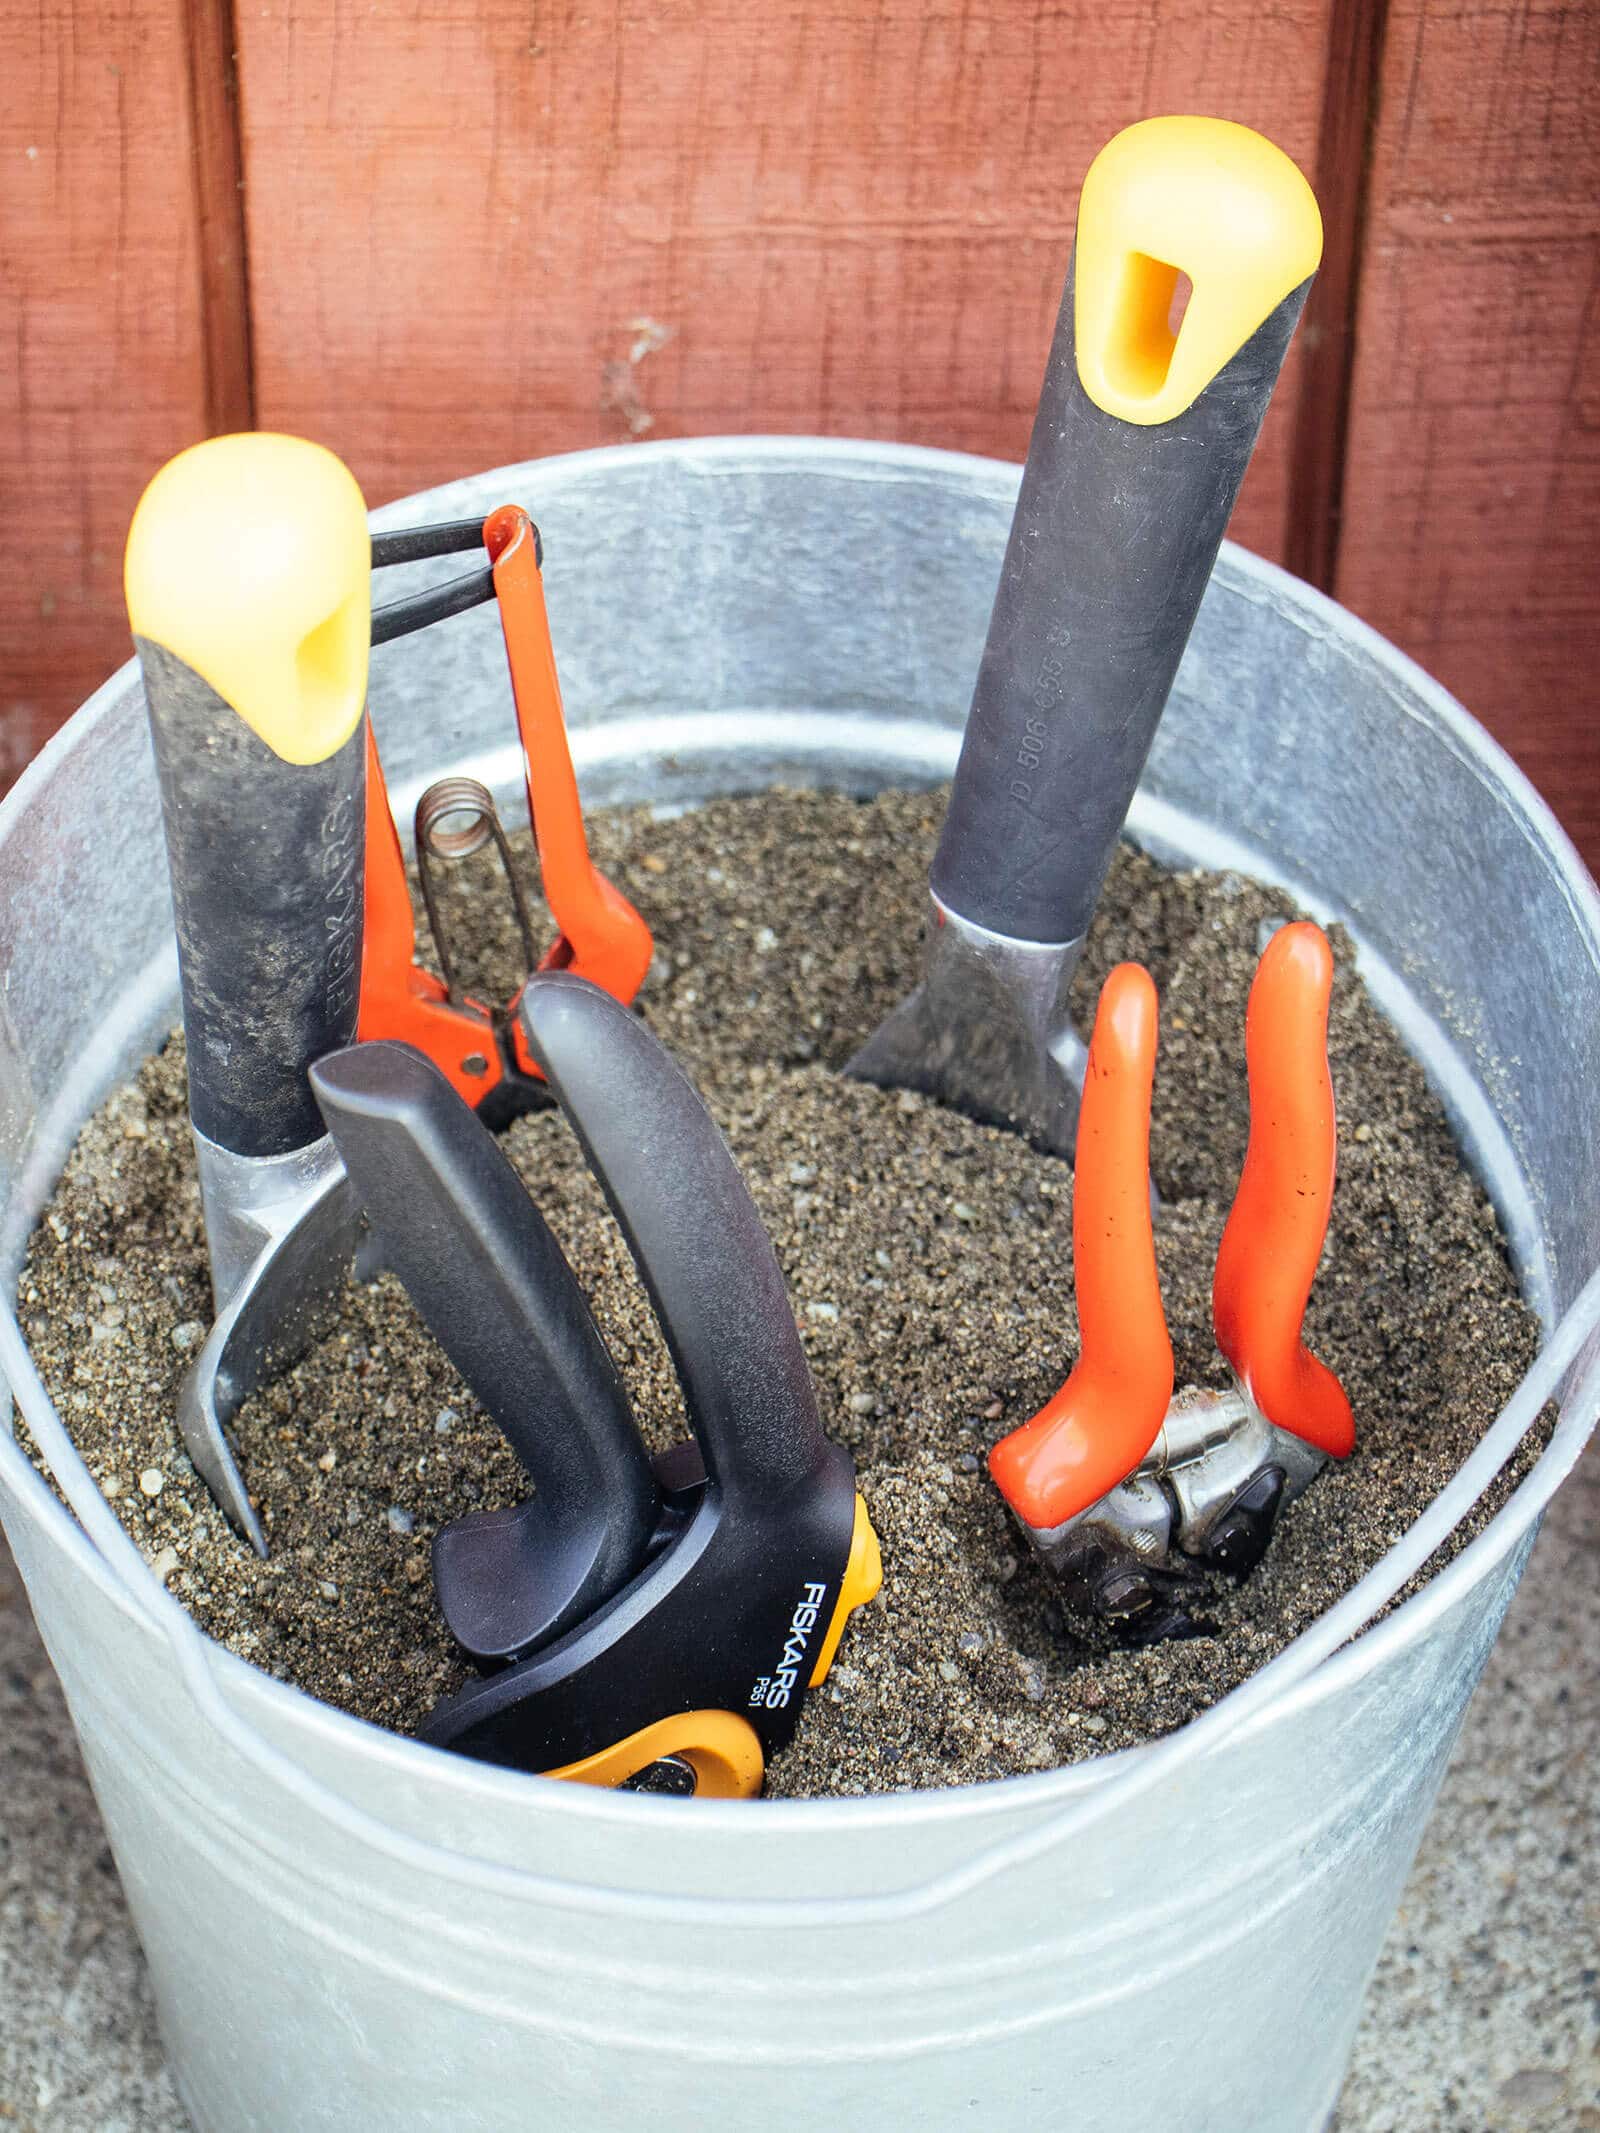 "Quick clean" sand bucket filled with garden tools